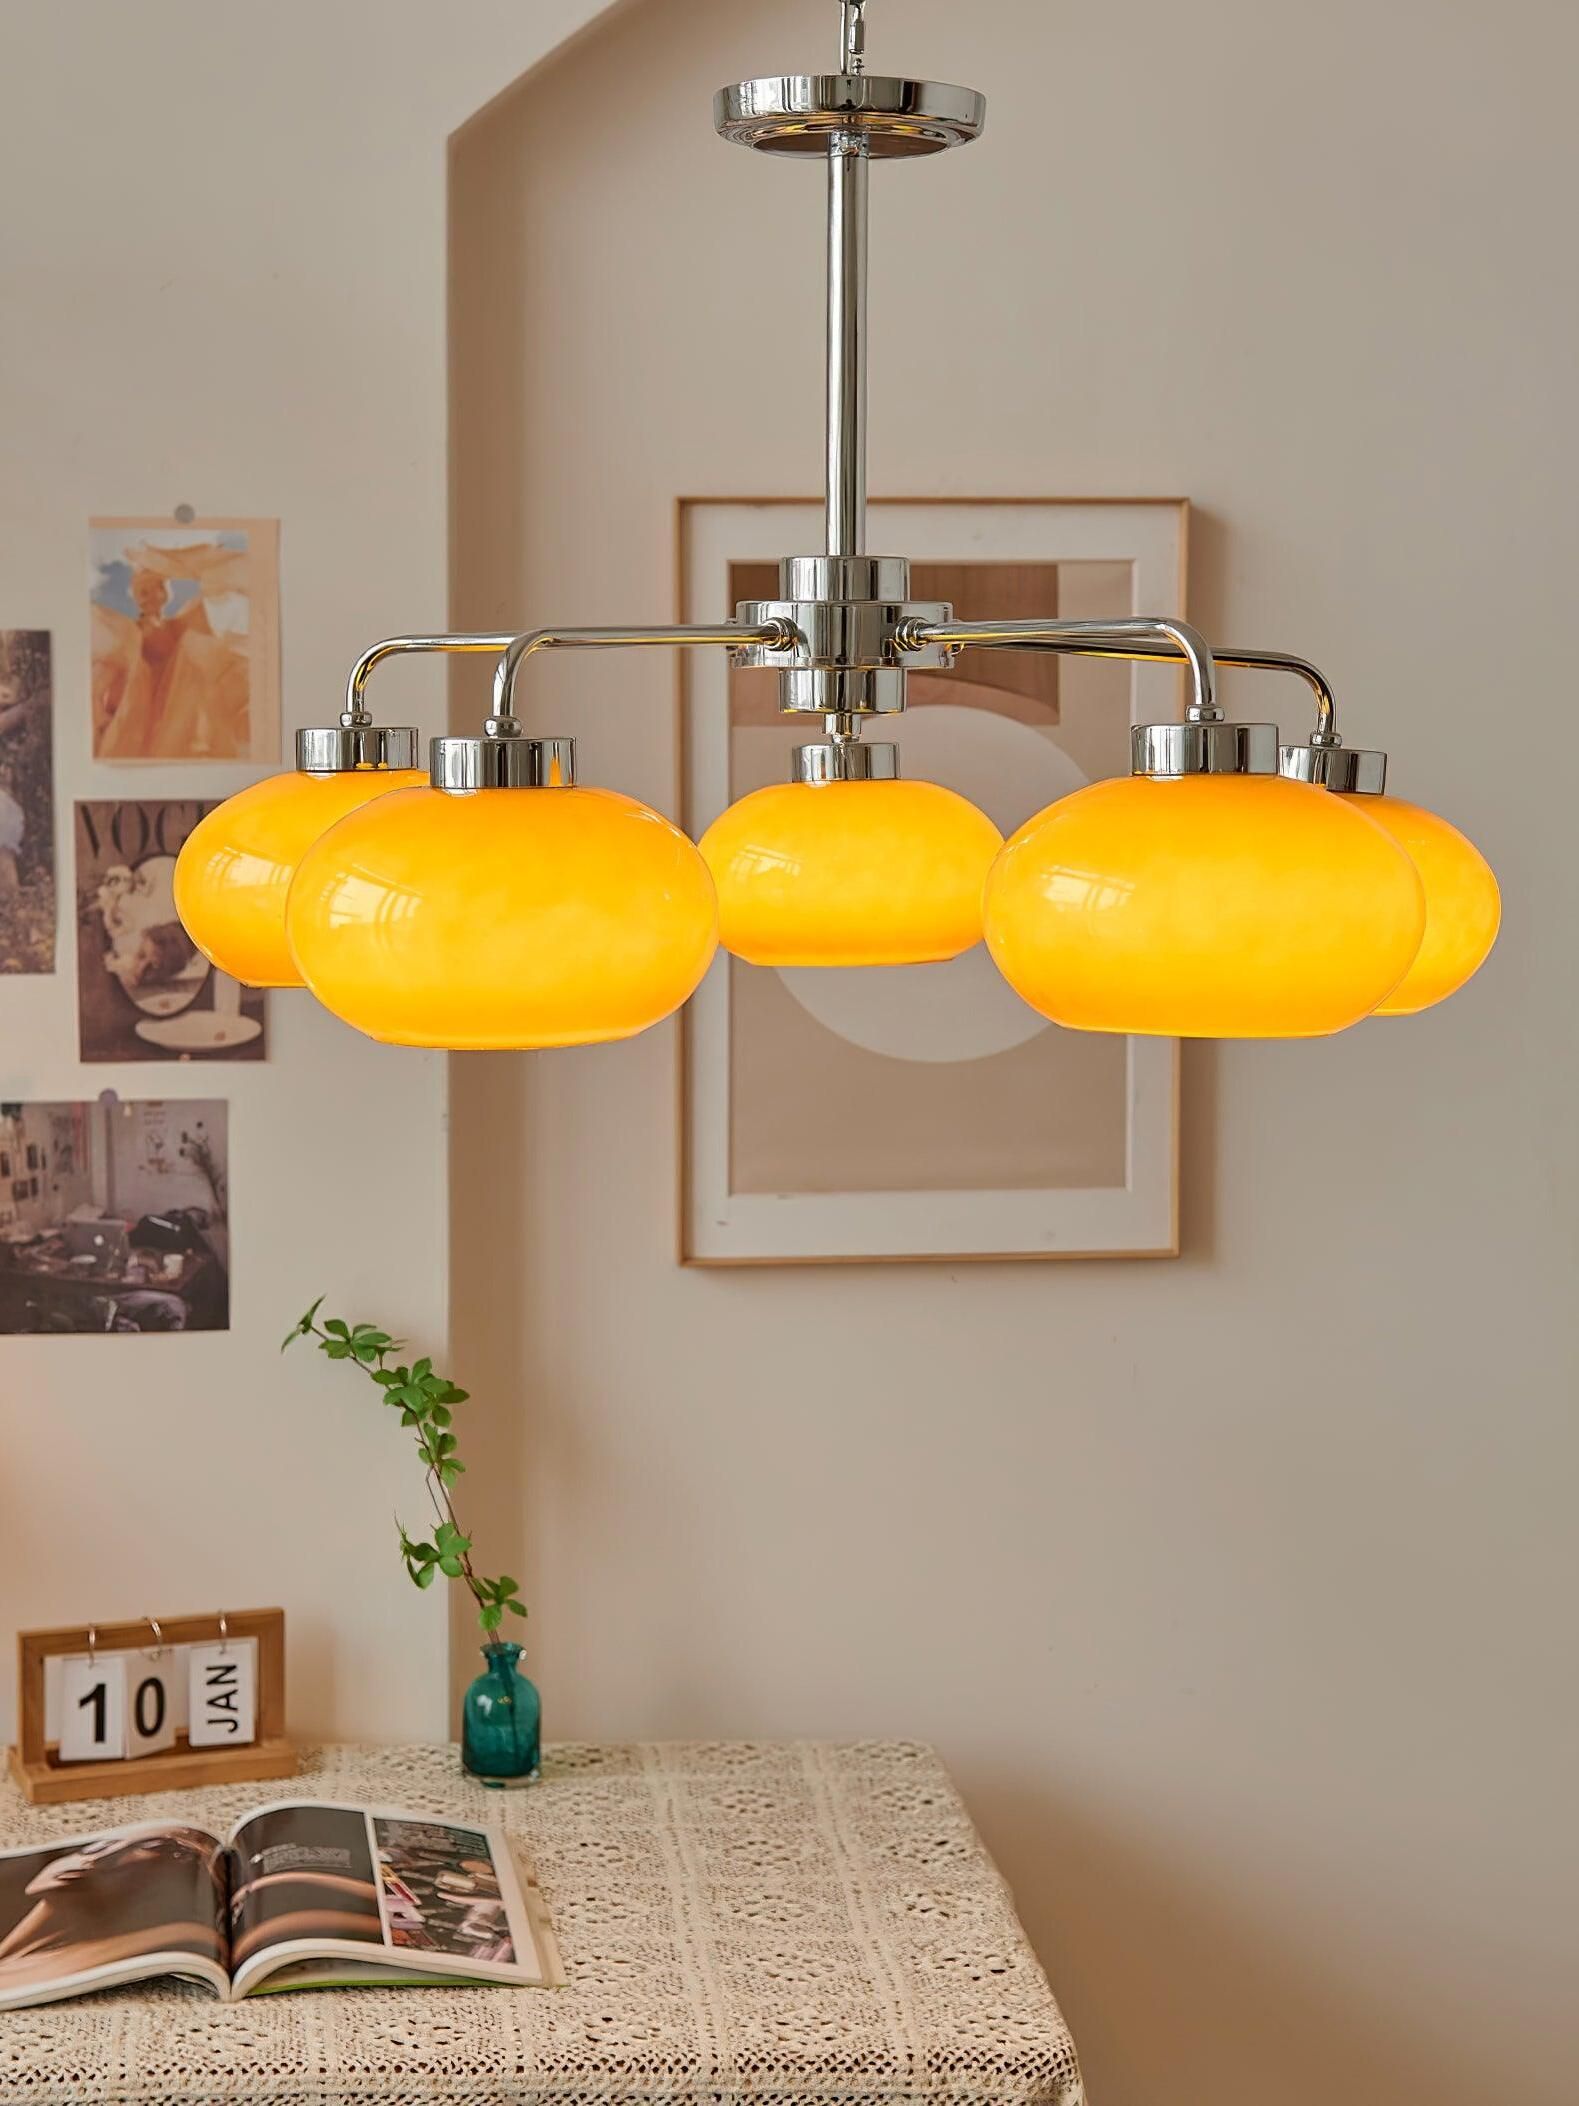 Hanging Chandelier Lamp Elevate Your Space with a Stunning Chandelier Lighting Fixture